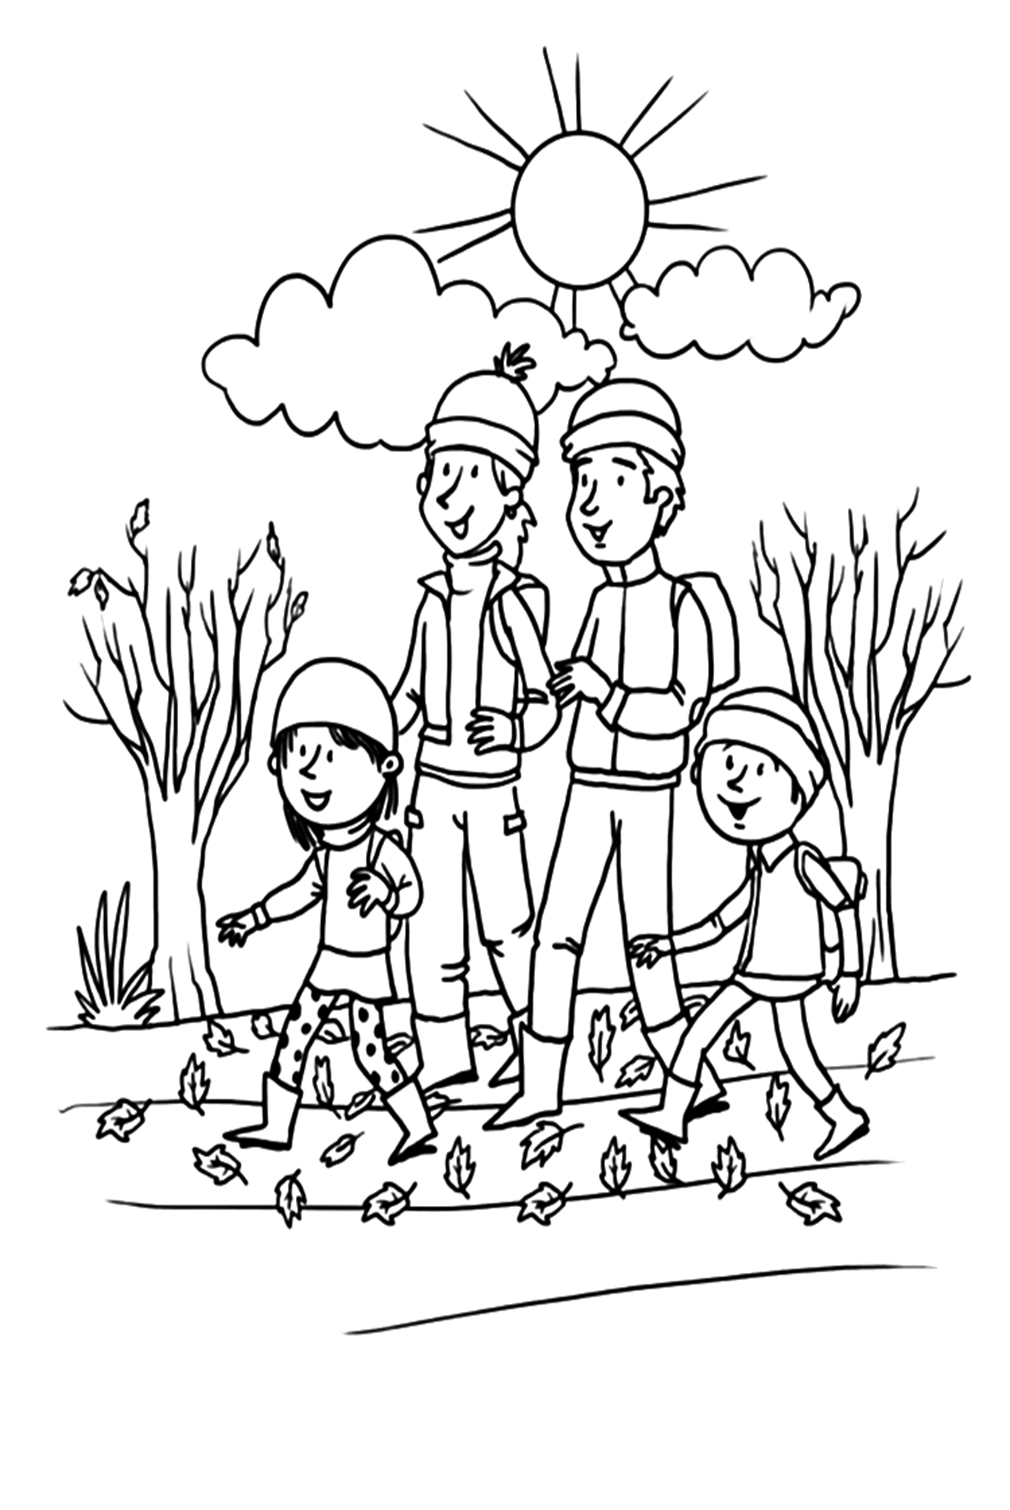 Fall Time Fun Of The Children Coloring Page